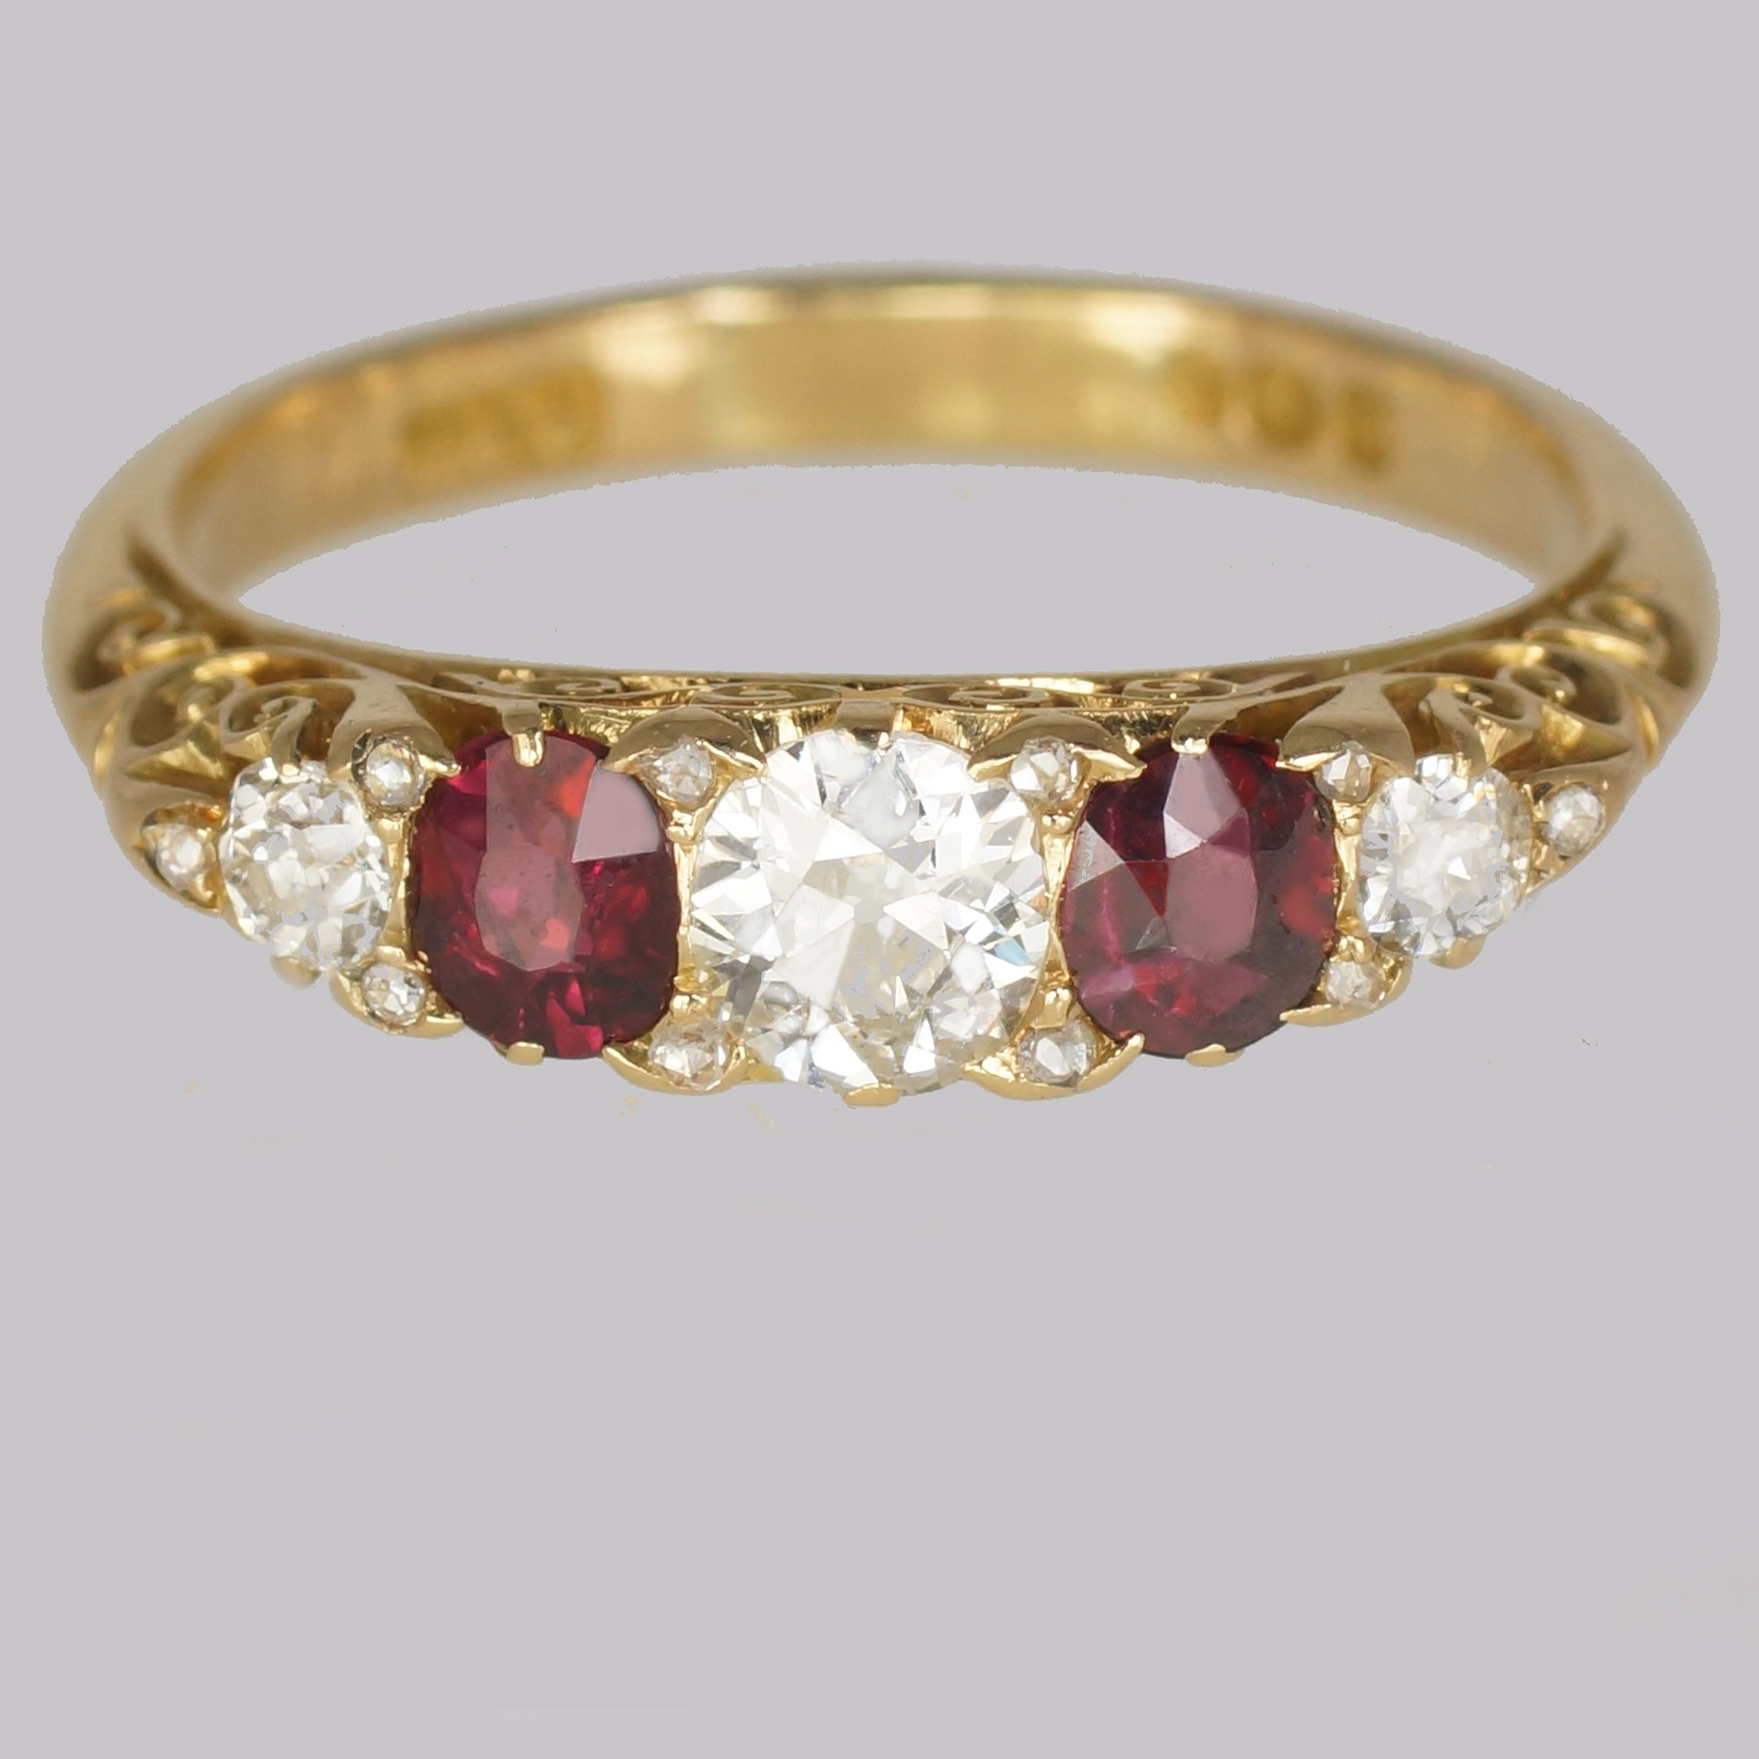 18 carat yellow gold antique ruby and diamond ring